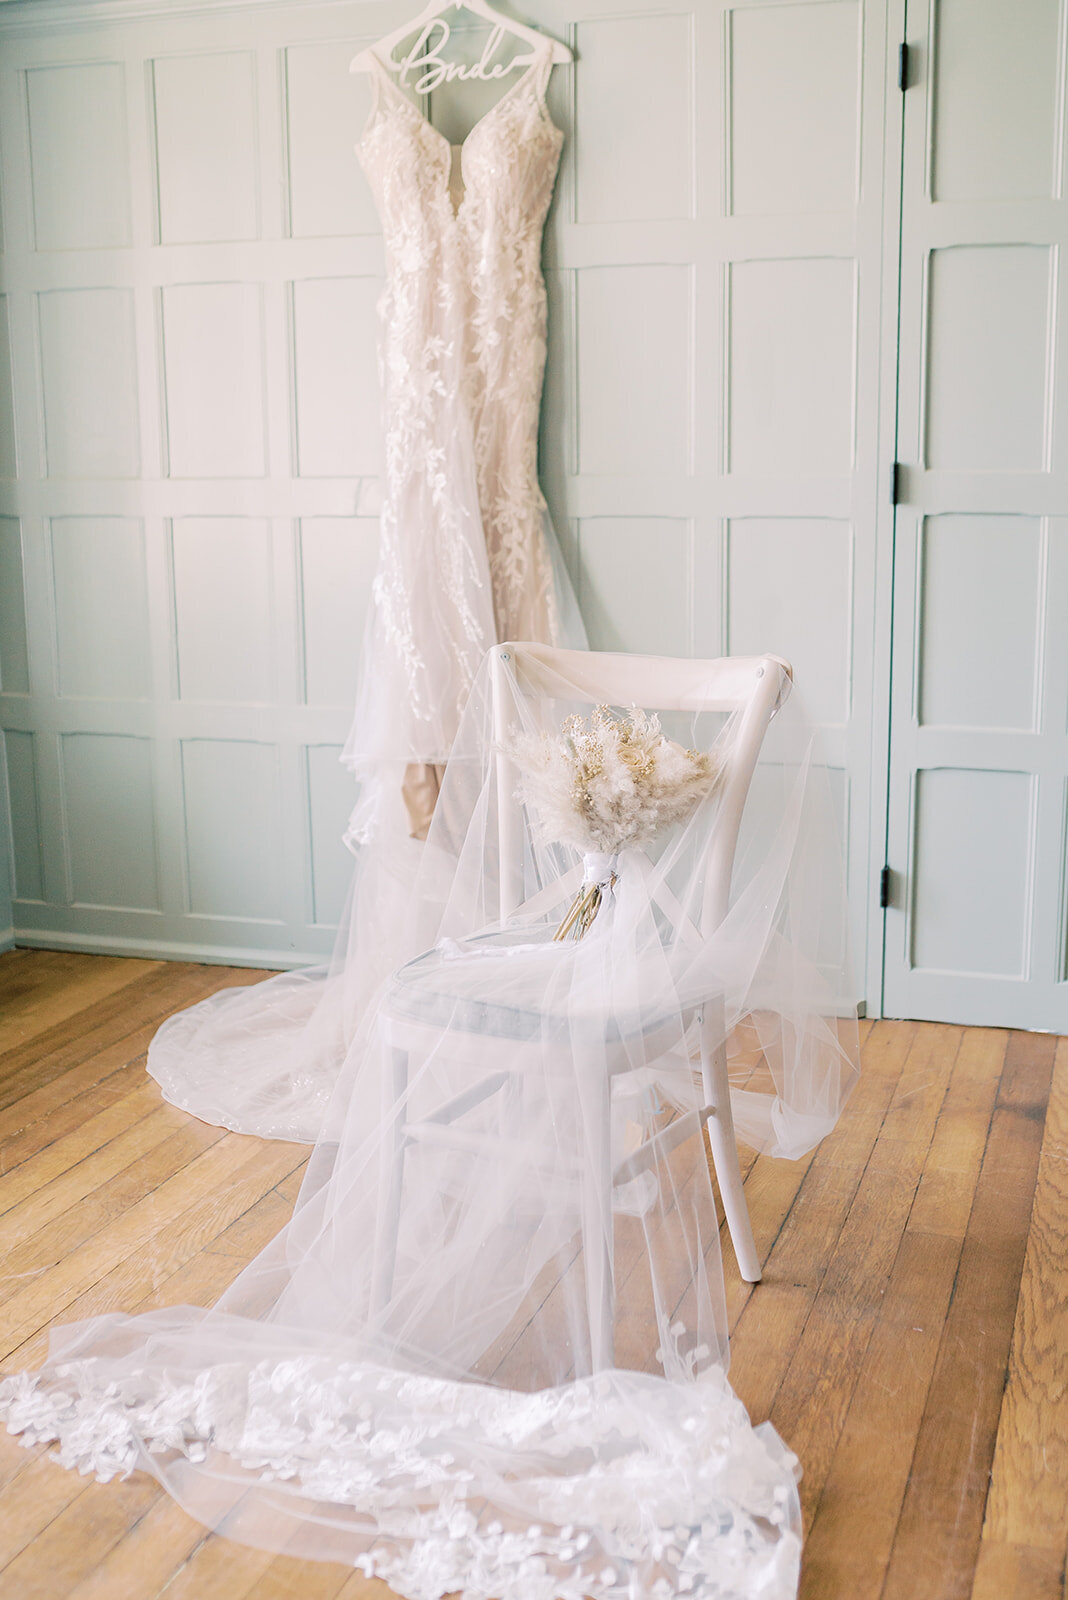 Light and airy image of the brides dress haging in the background and the veil and bouquet on a chair.